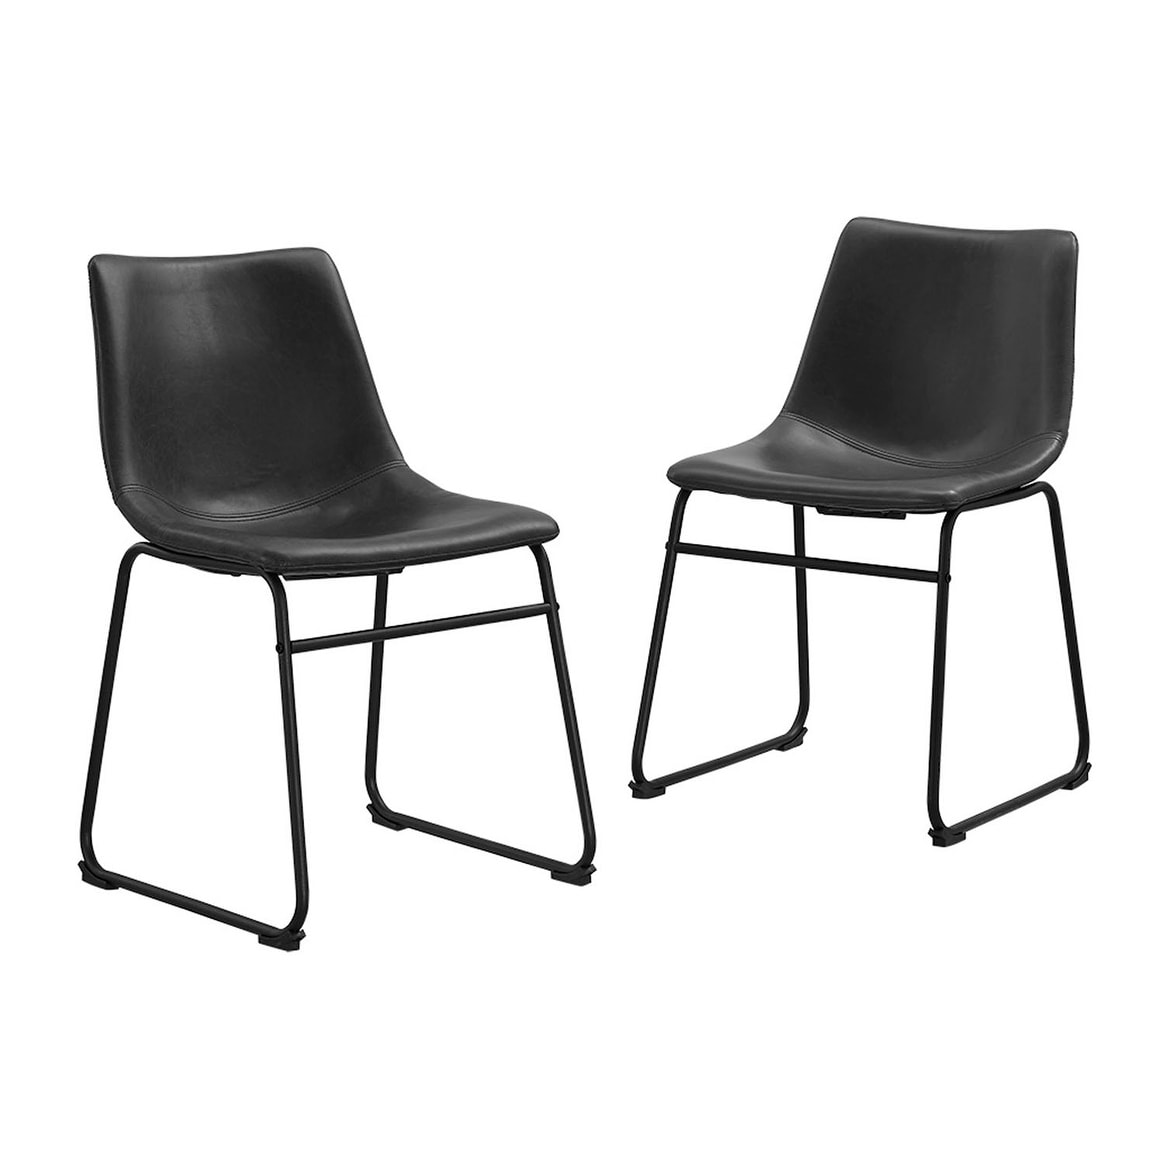 Shop Offex Modern Faux Leather Dining Kitchen Chair Set Of 2